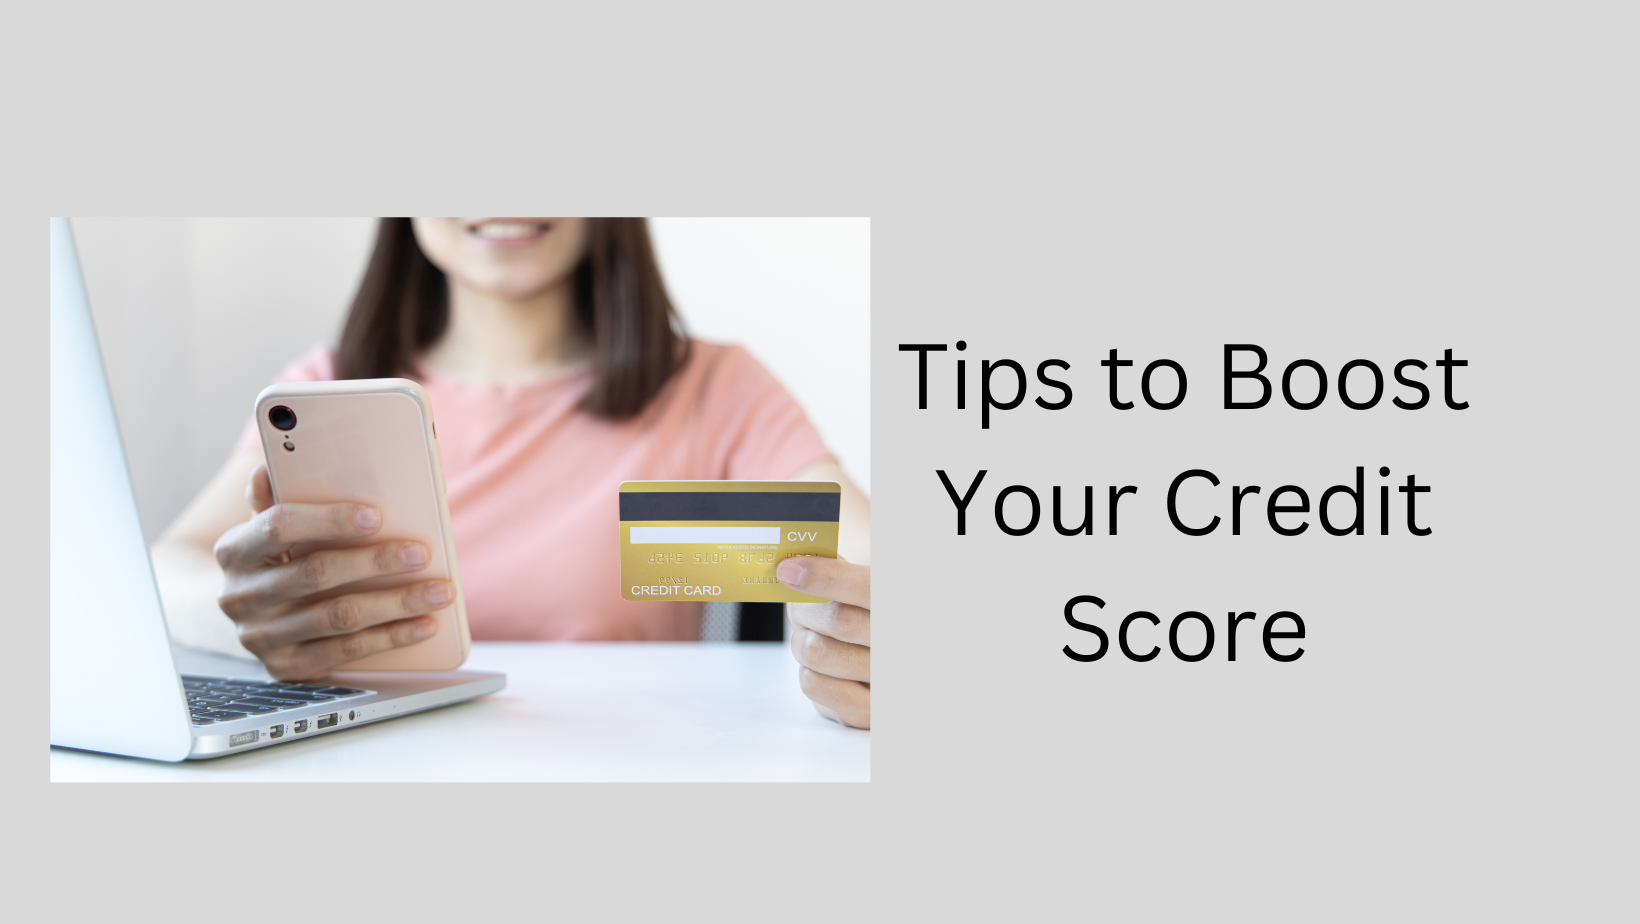 Tips to boost your credit score